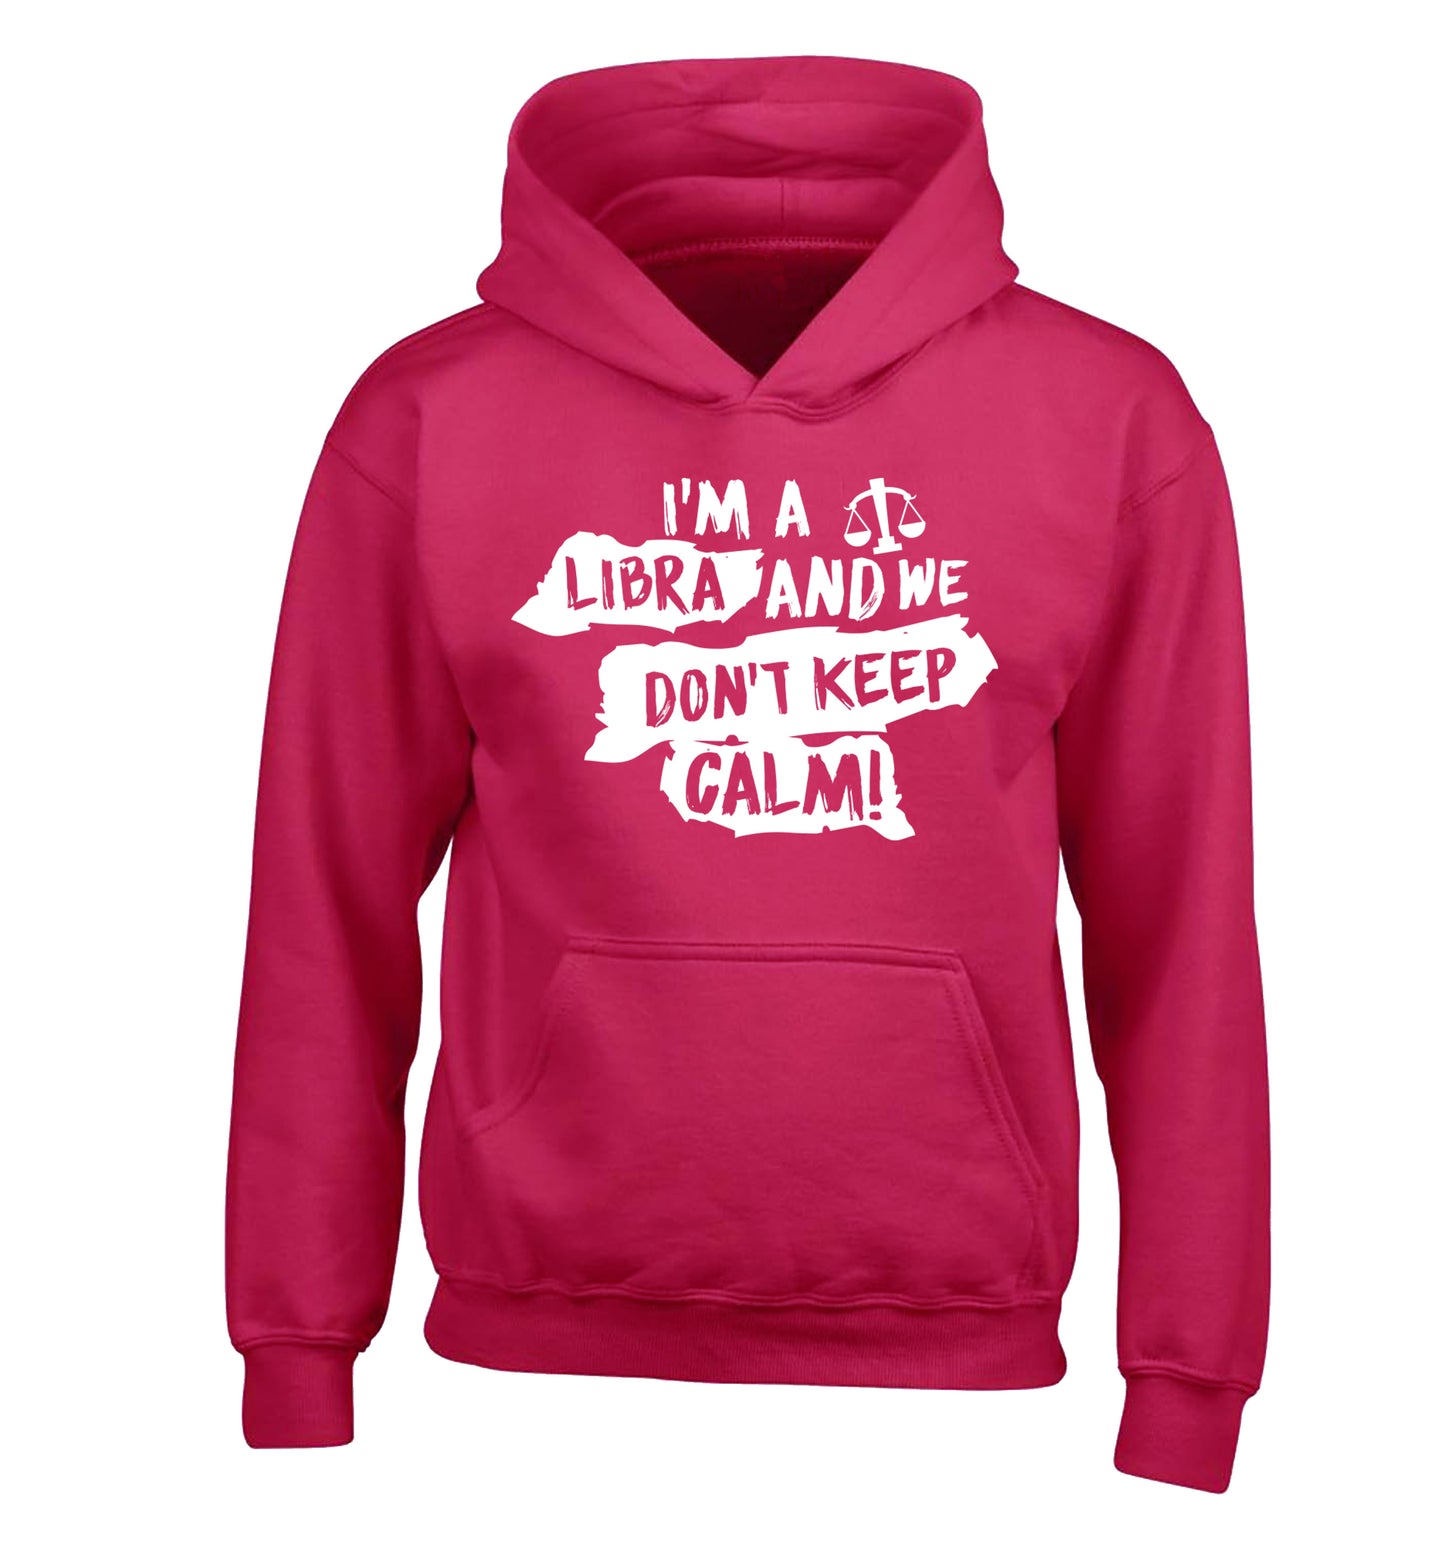 I'm a libra and we don't keep calm children's pink hoodie 12-13 Years